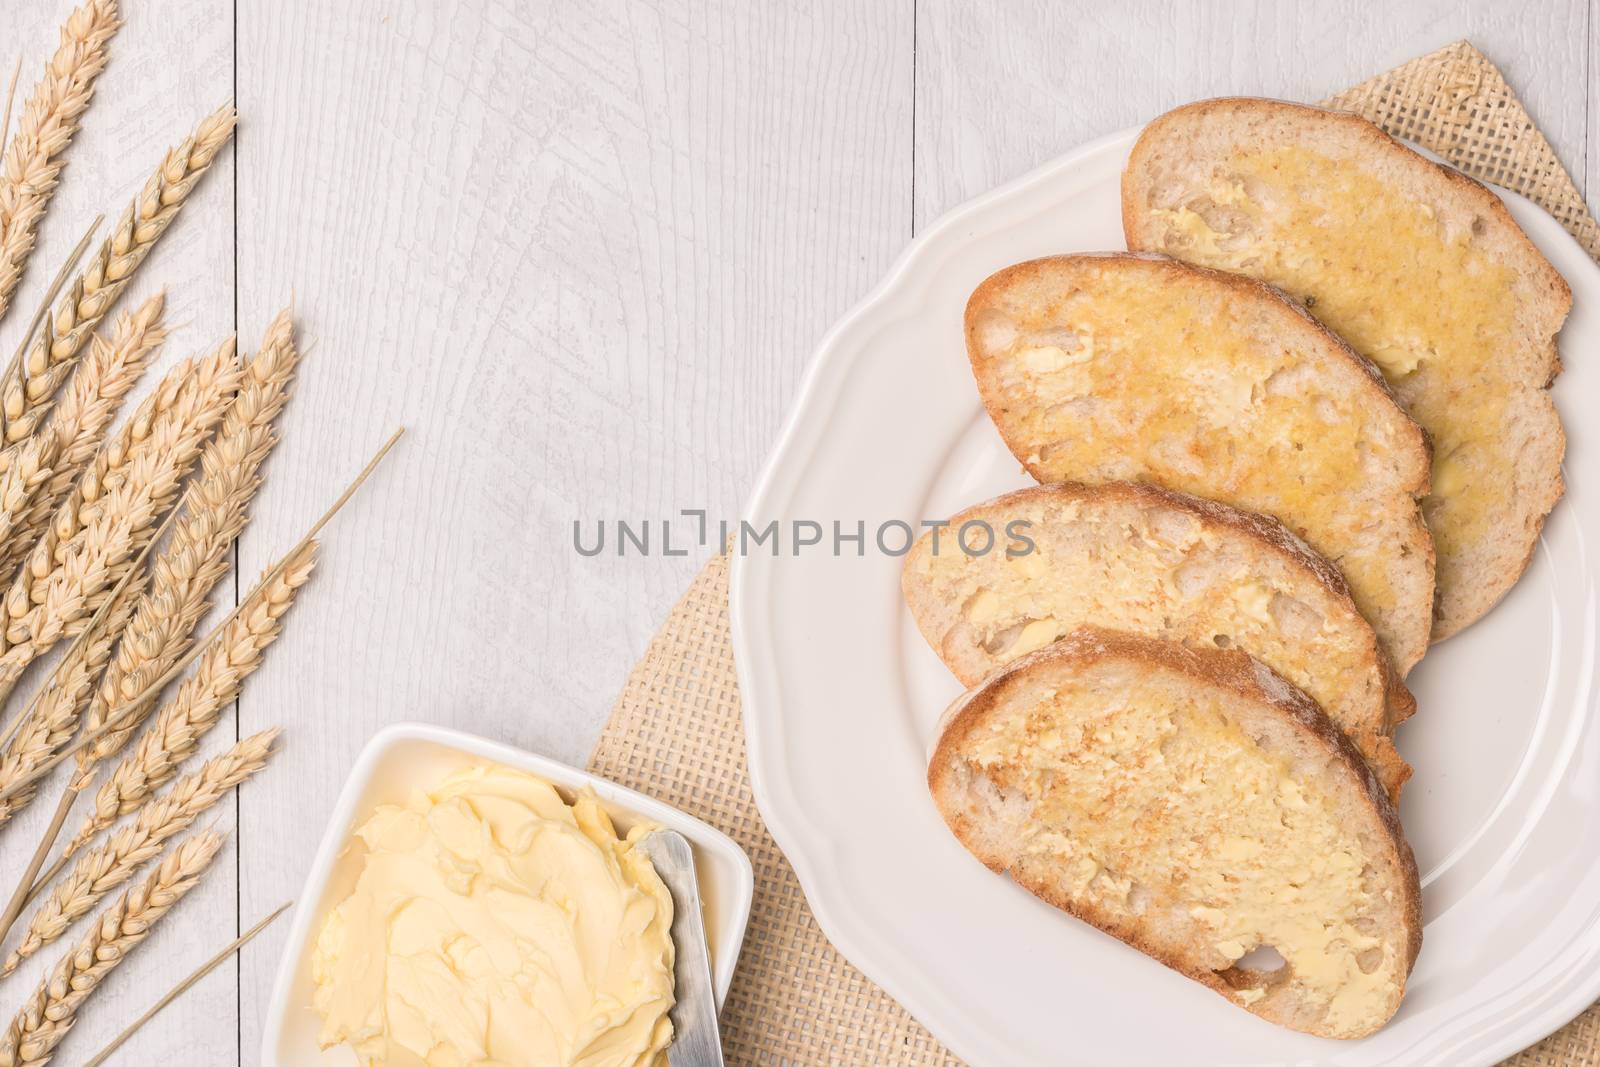 Fresh bread, wheat spike and homemade butter on wooden backgroun by AnaMarques